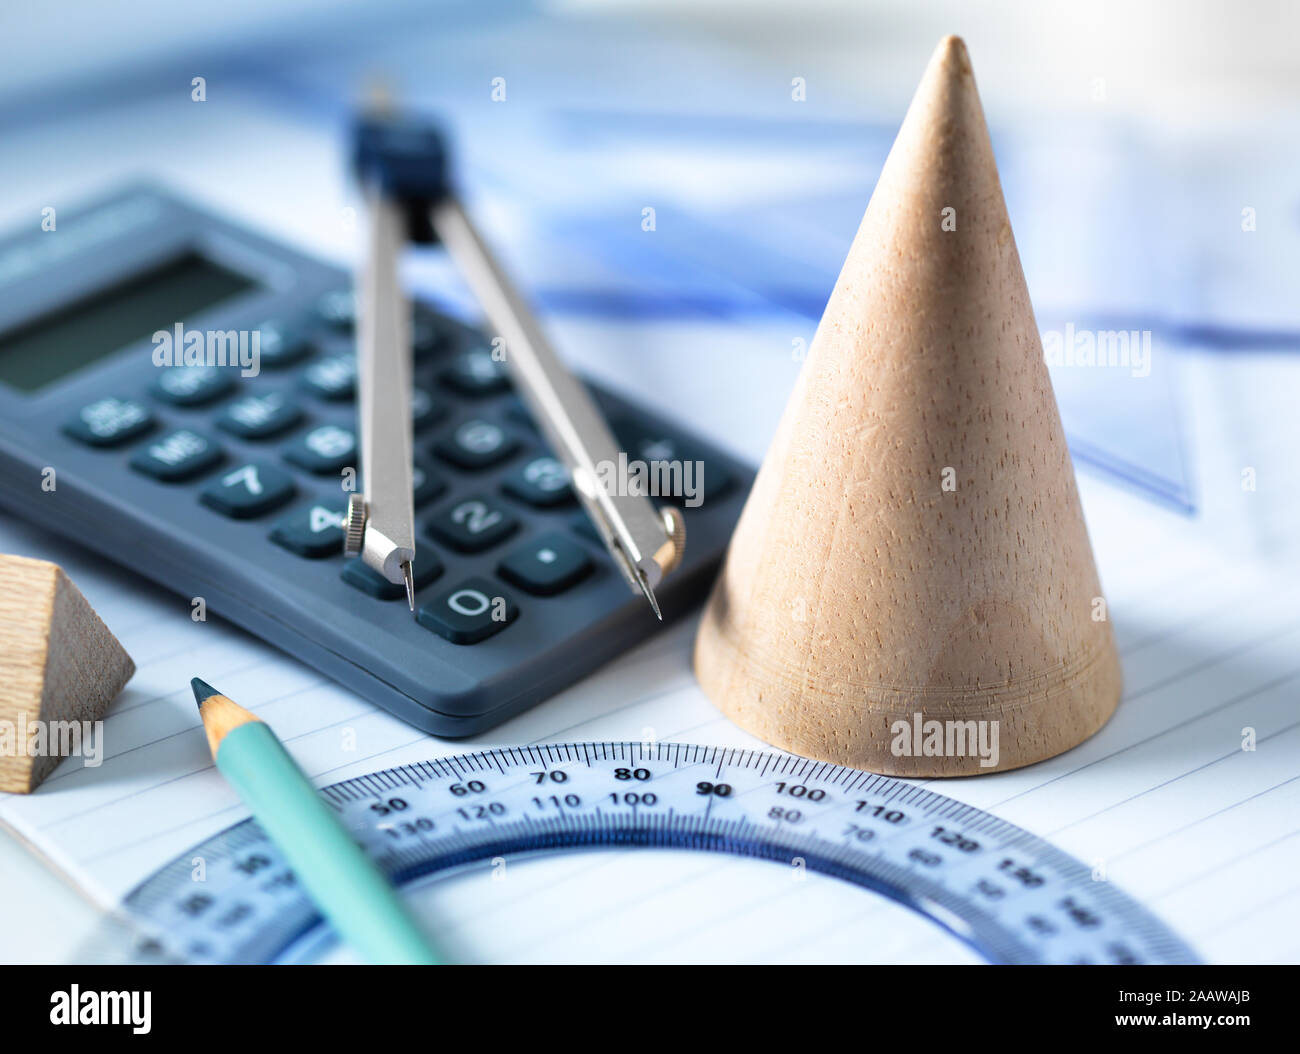 High angle view of mathematical instruments on table Stock Photo